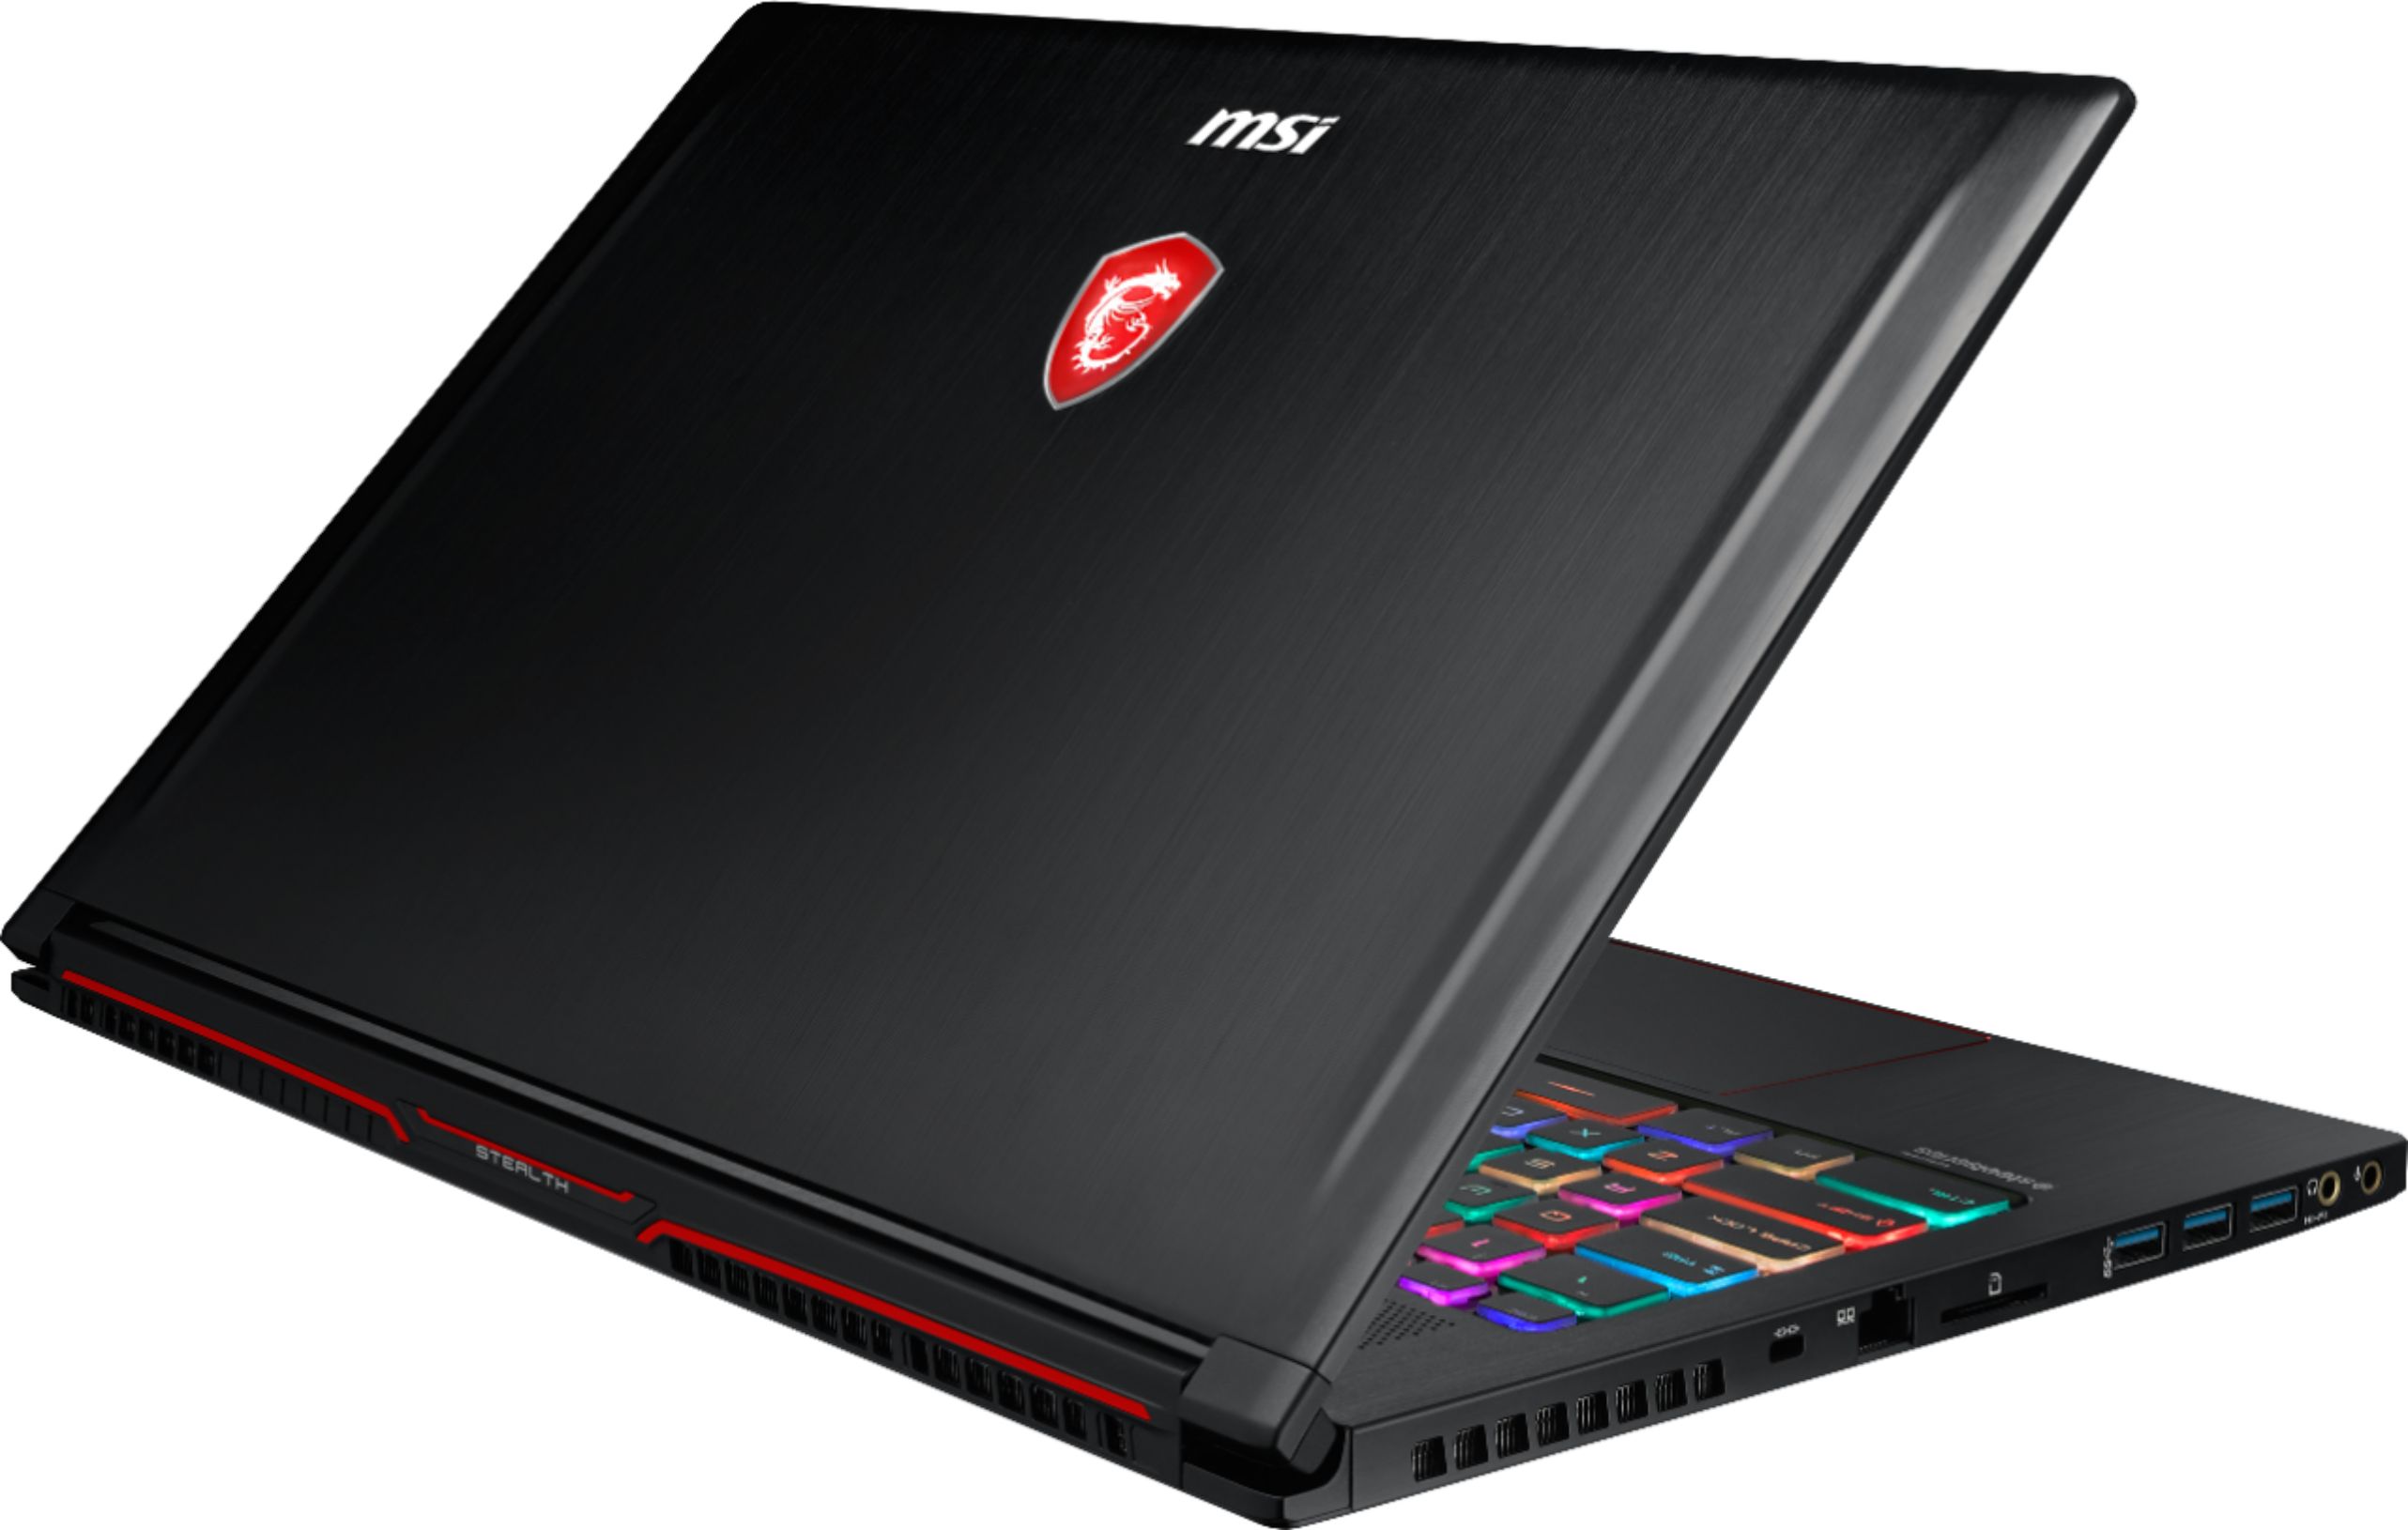 kobber ydre Hård ring Best Buy: MSI 15.6" Gaming Laptop Intel Core i7 16GB Memory NVIDIA GeForce GTX  1060 1TB Hard Drive + 256GB Solid State Drive Aluminum Black GS63  STEALTH-010